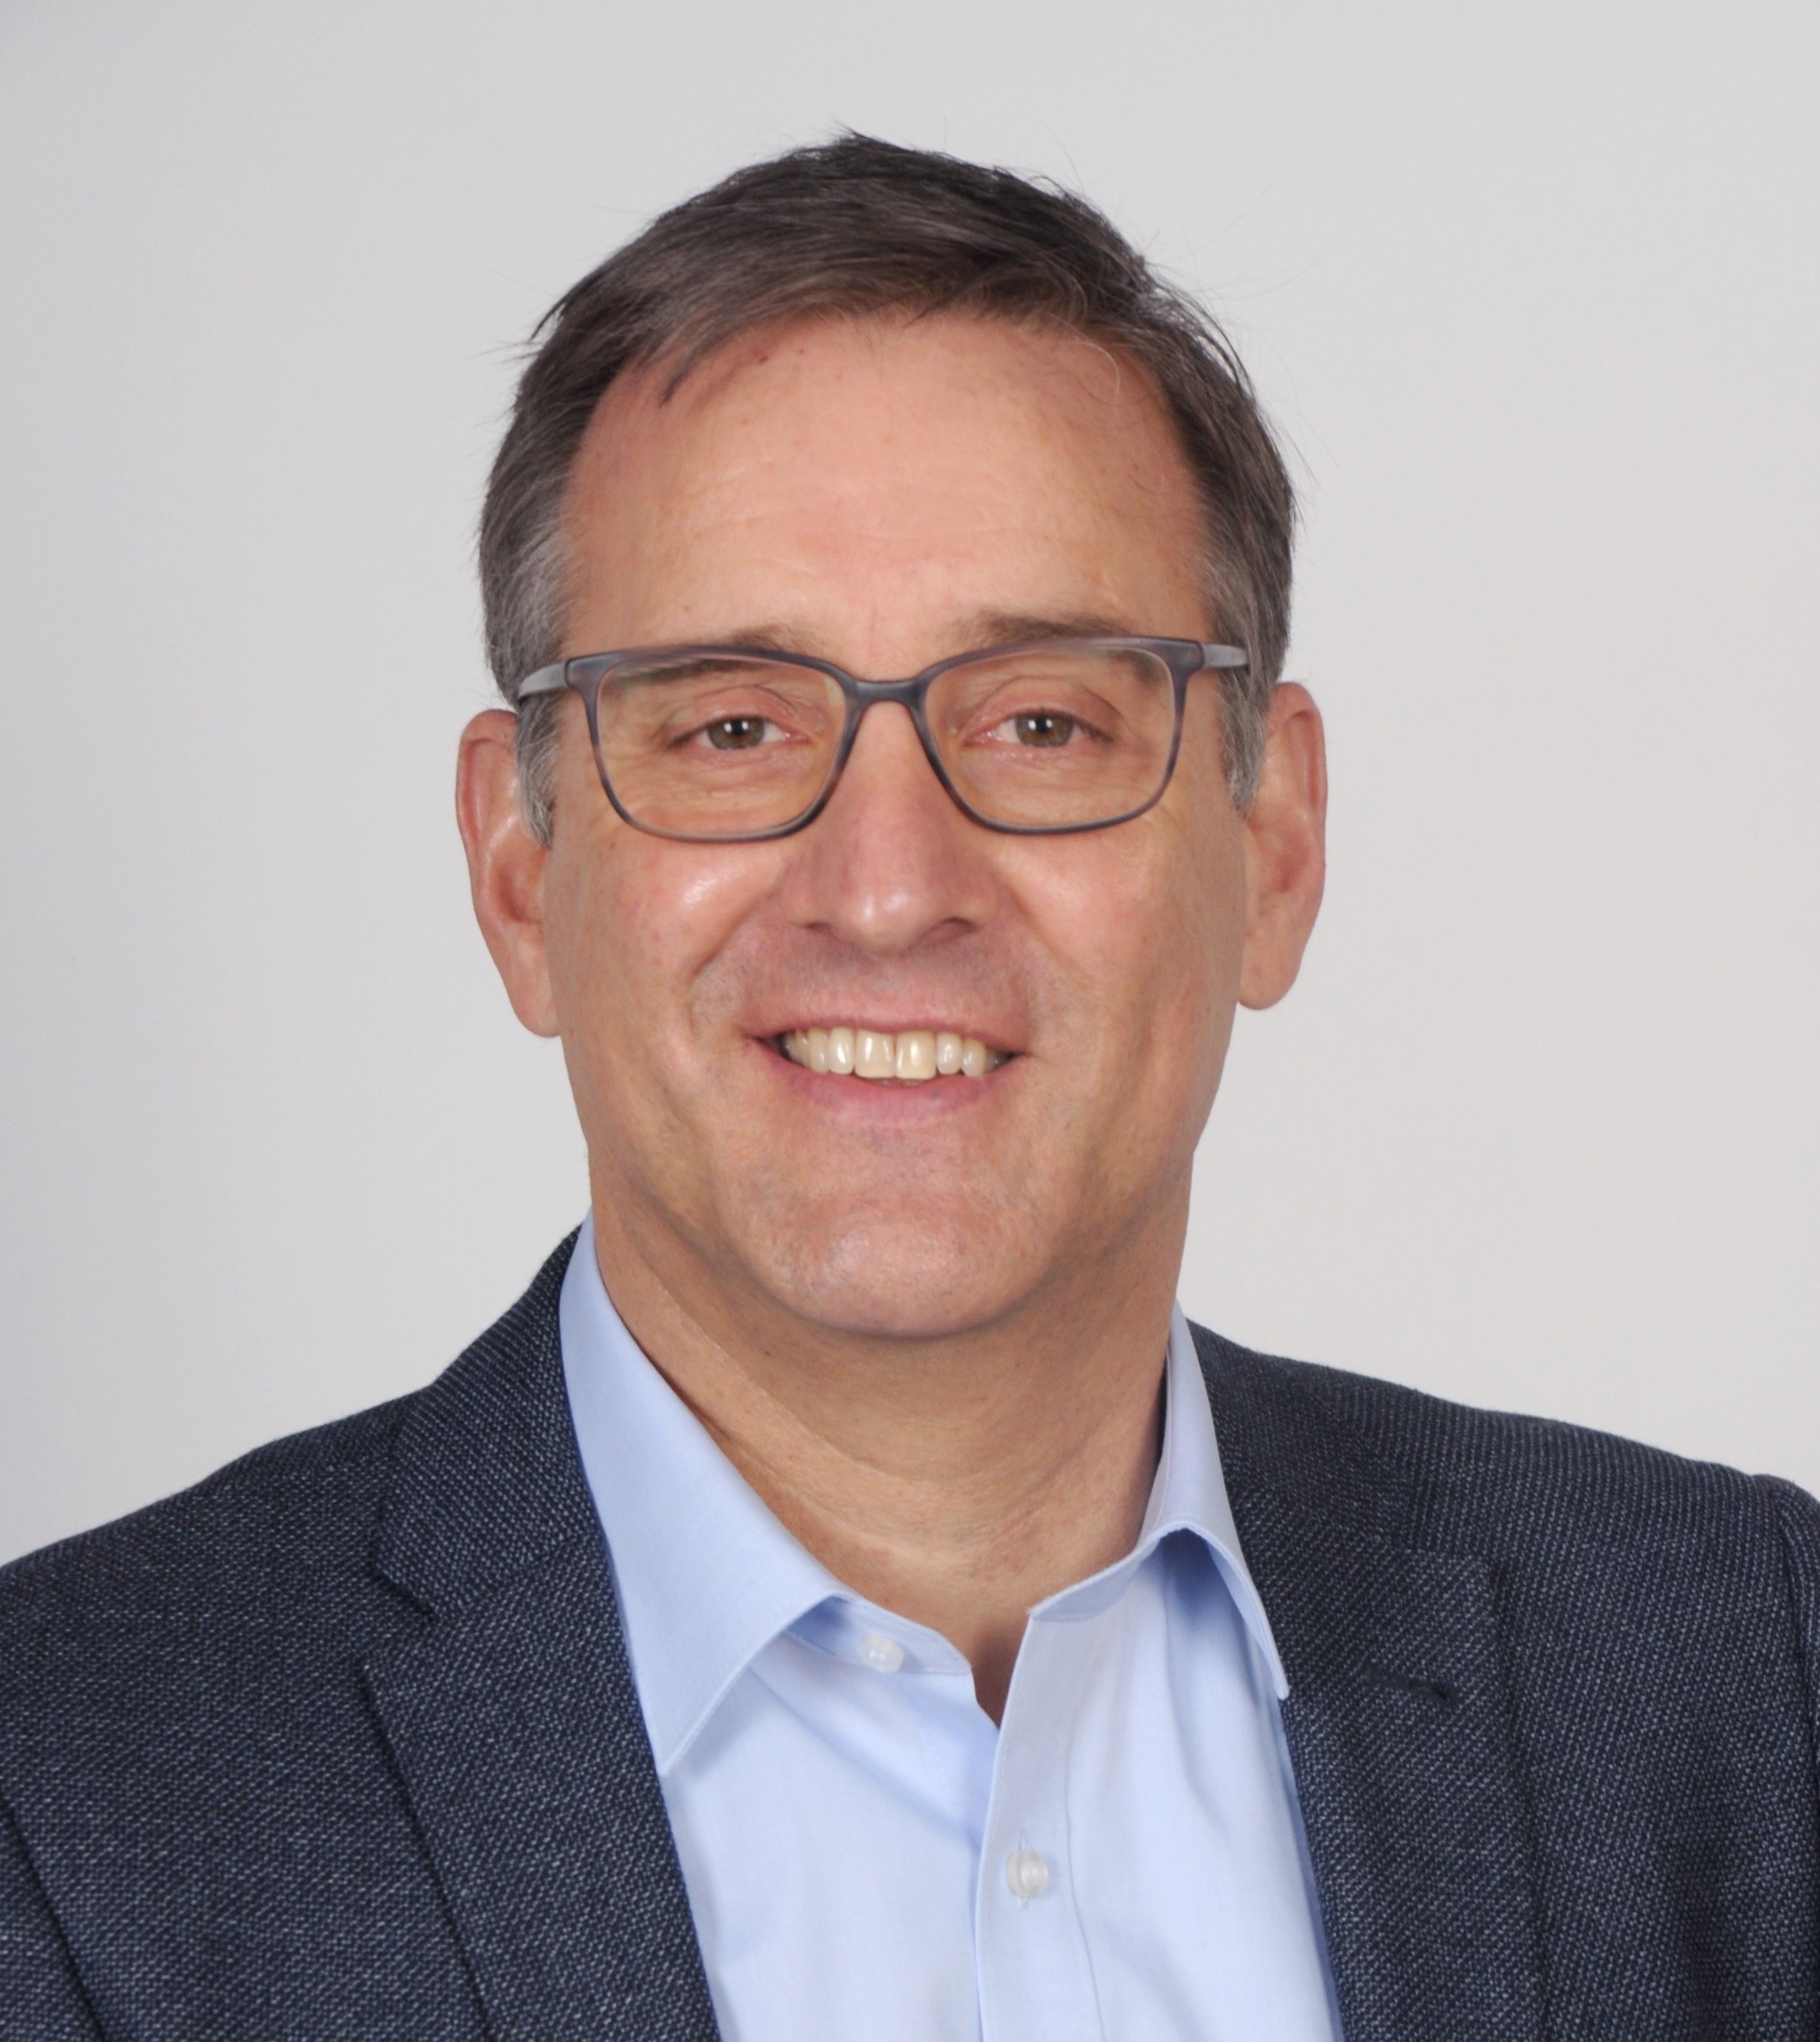 Alfred Vrieling, Vice President Sales Europe bei Compleo